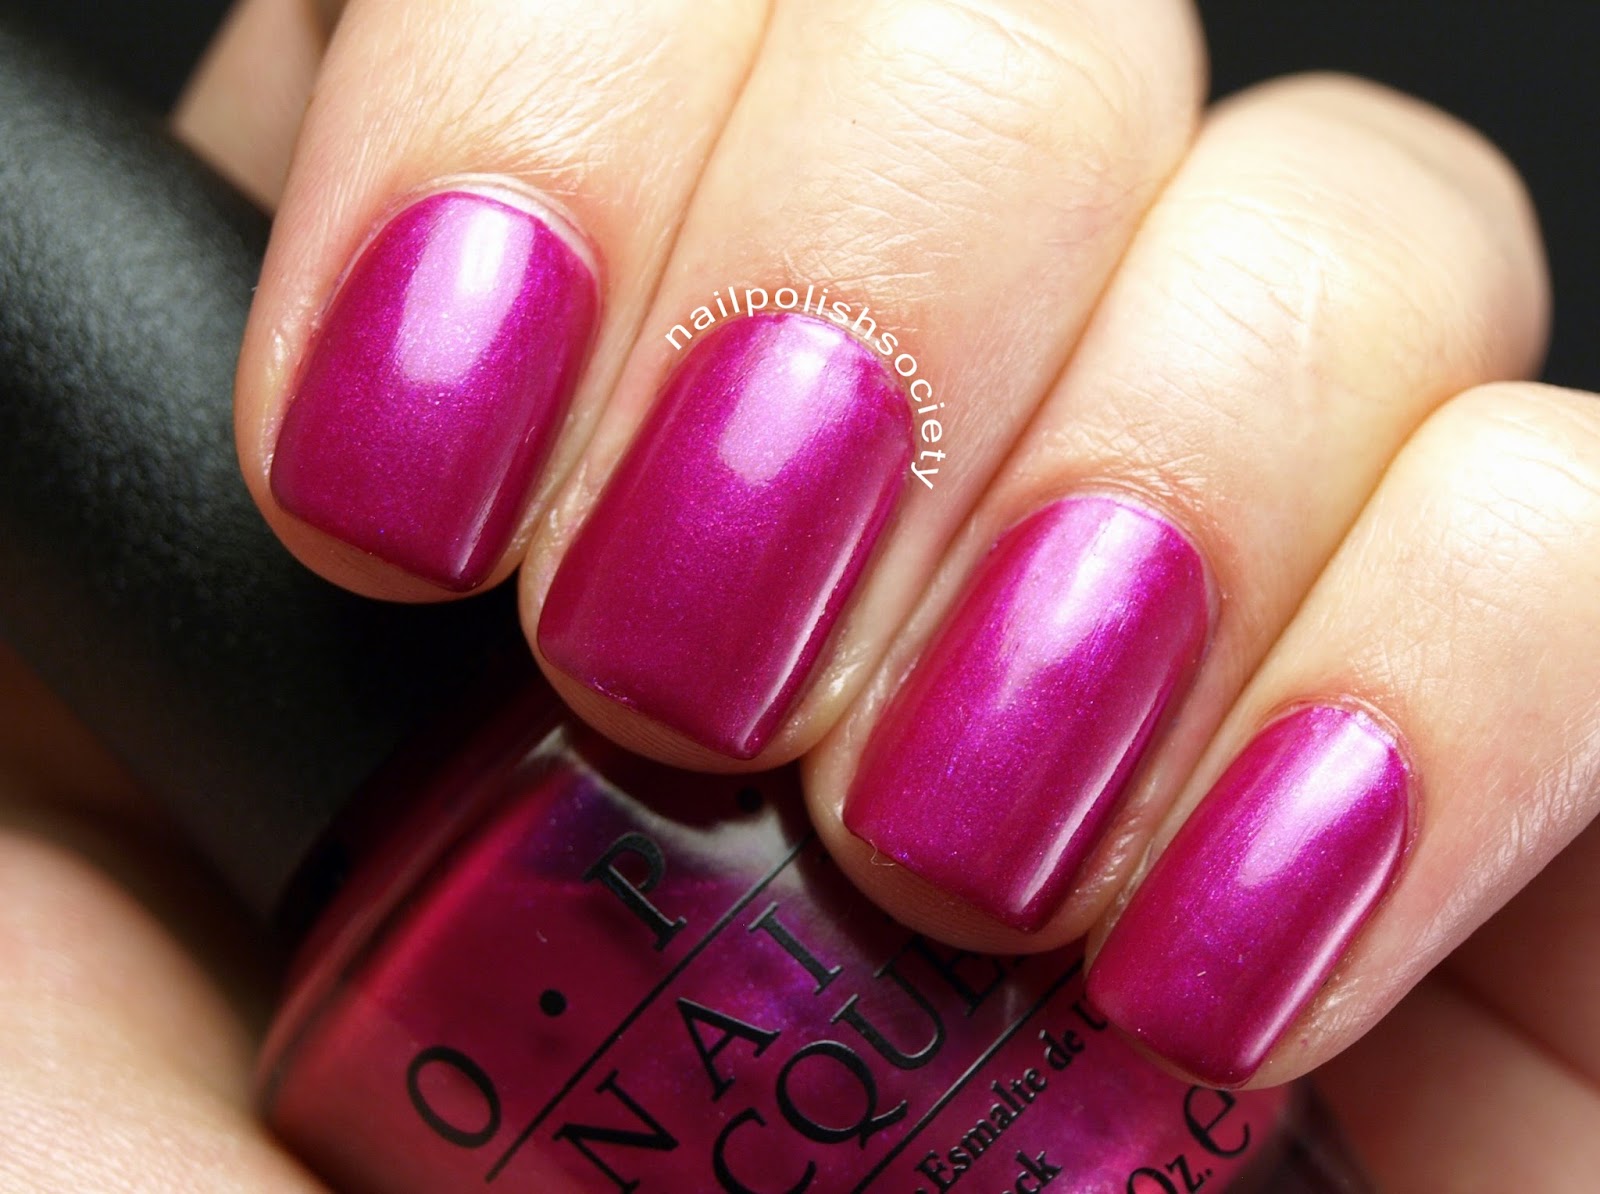 10. Sinful Colors Professional Nail Polish in "Fuchsia Fever" - wide 10